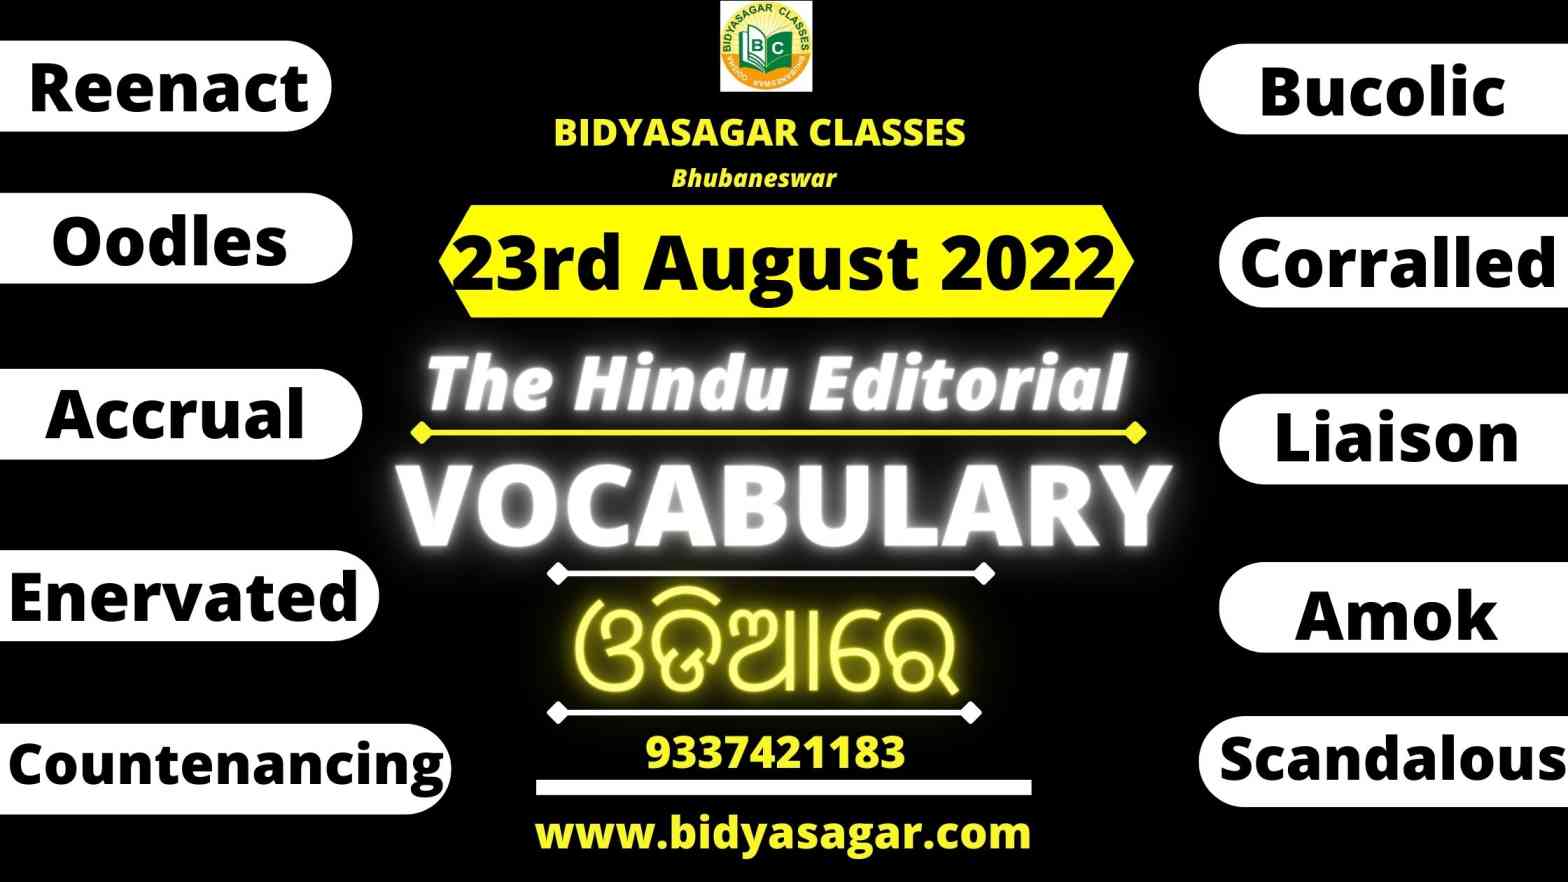 The Hindu Editorial Vocabulary of 23rd August 2022